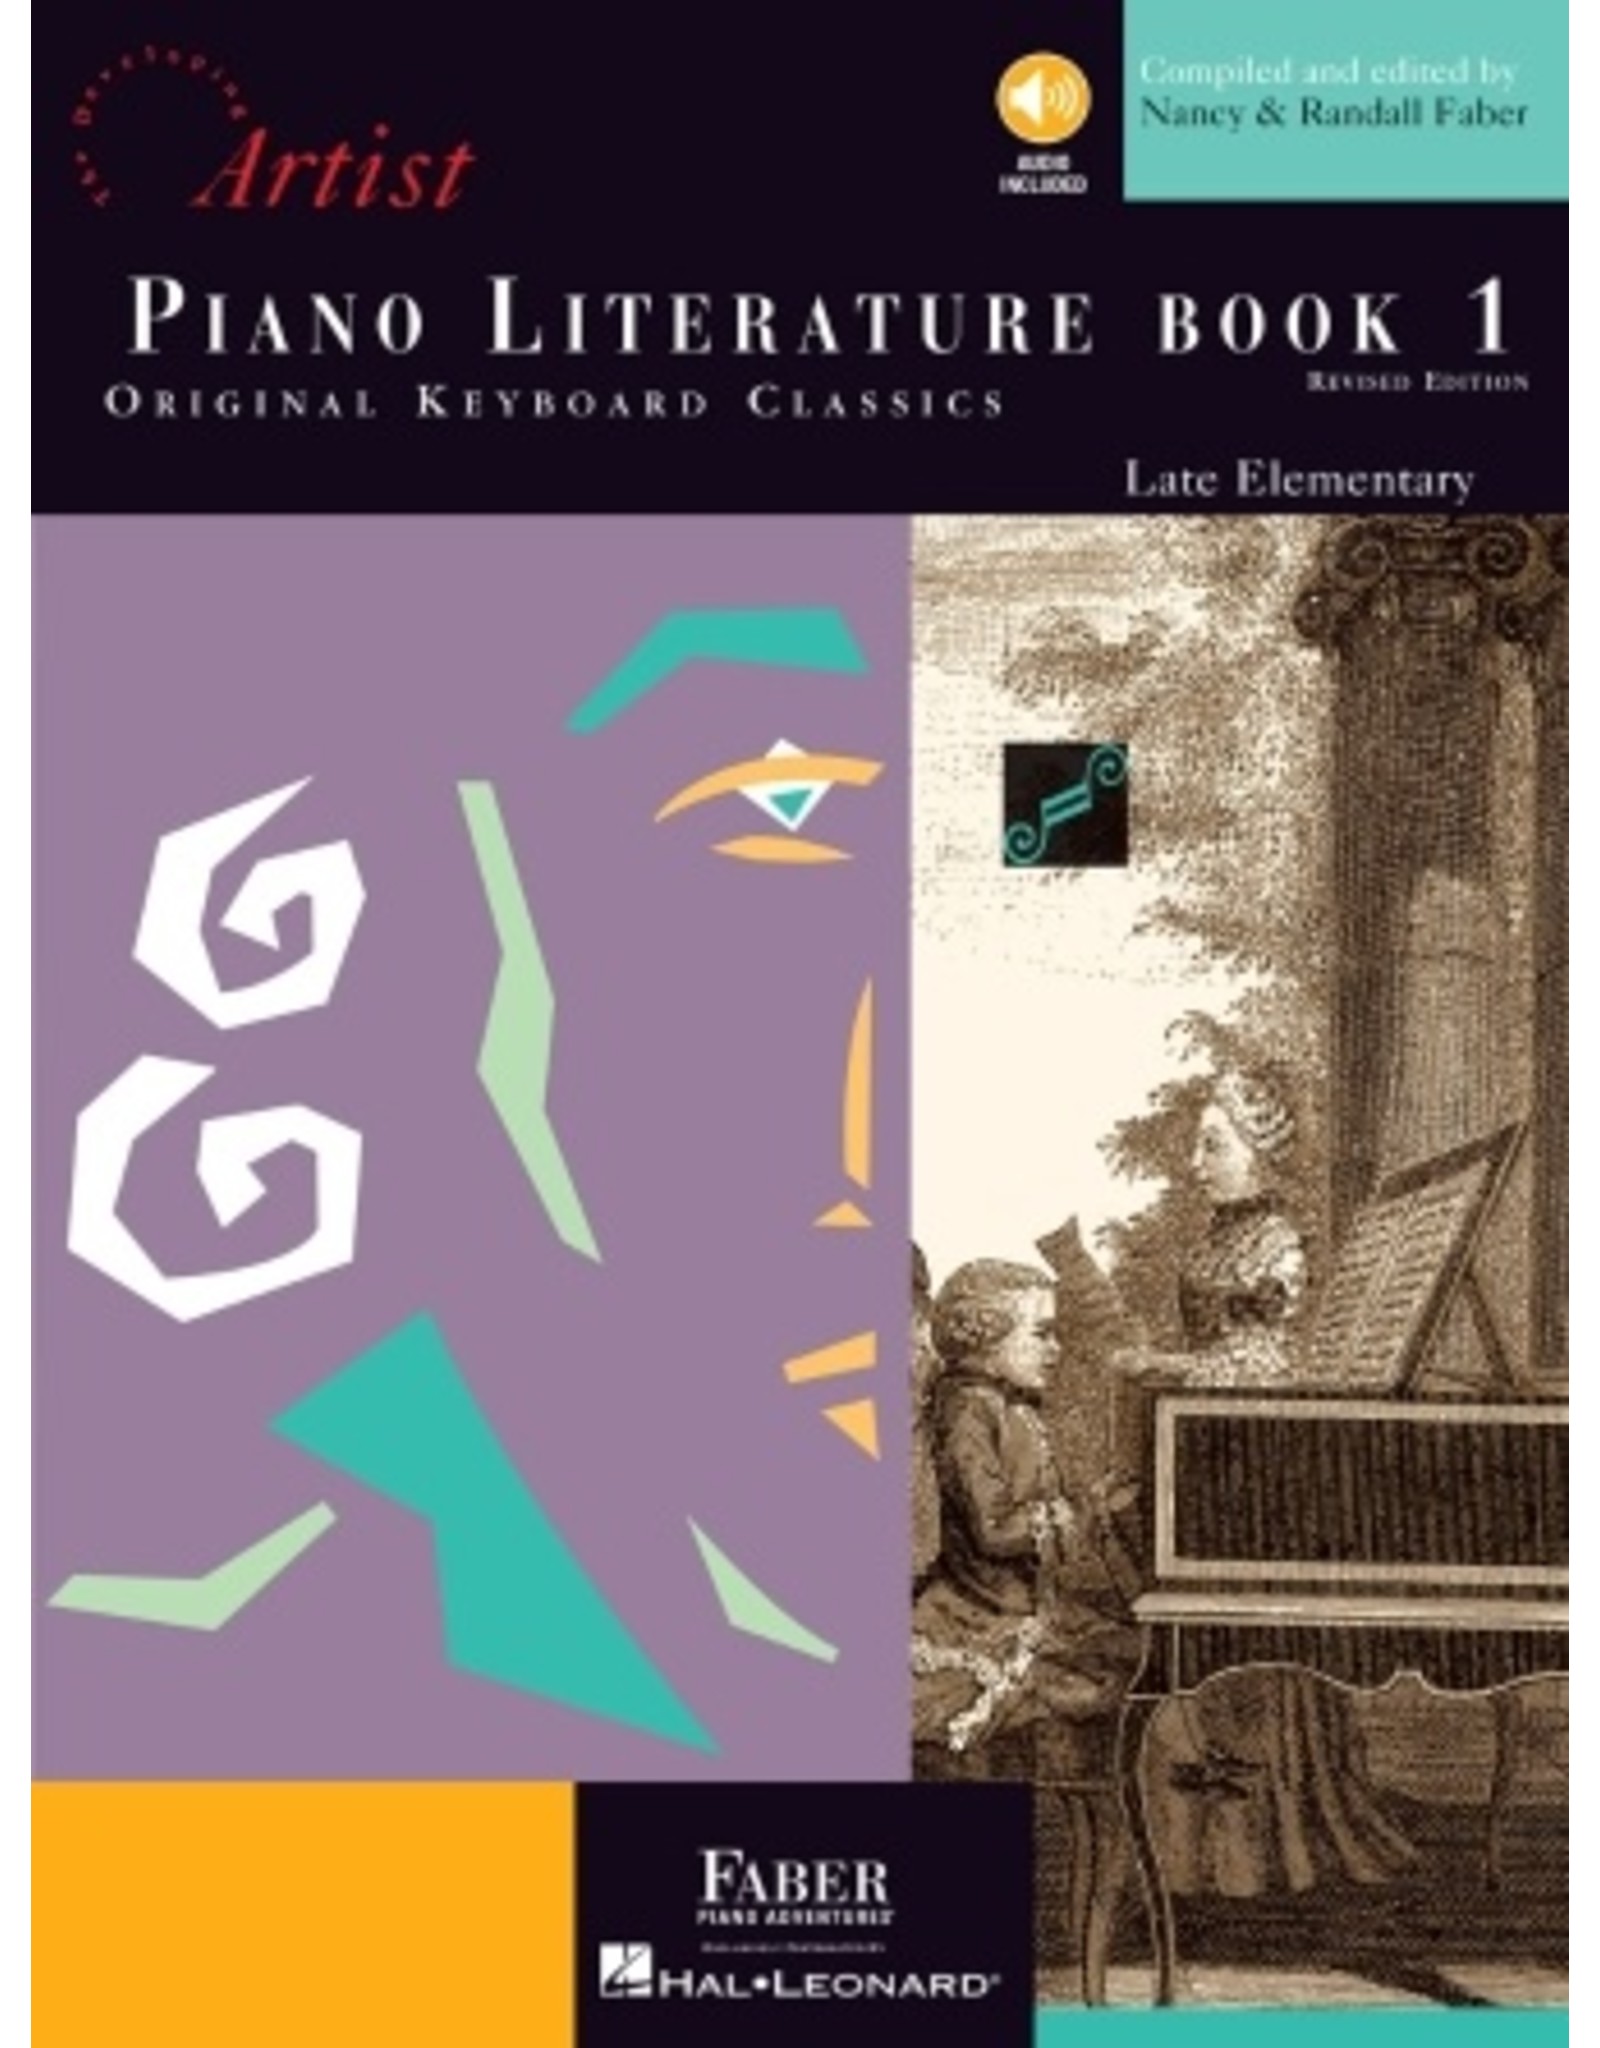 Hal Leonard Piano Literature - Book 1 Developing Artist Original Keyboard Classics compiled by Faber & Faber Faber Piano Adventures